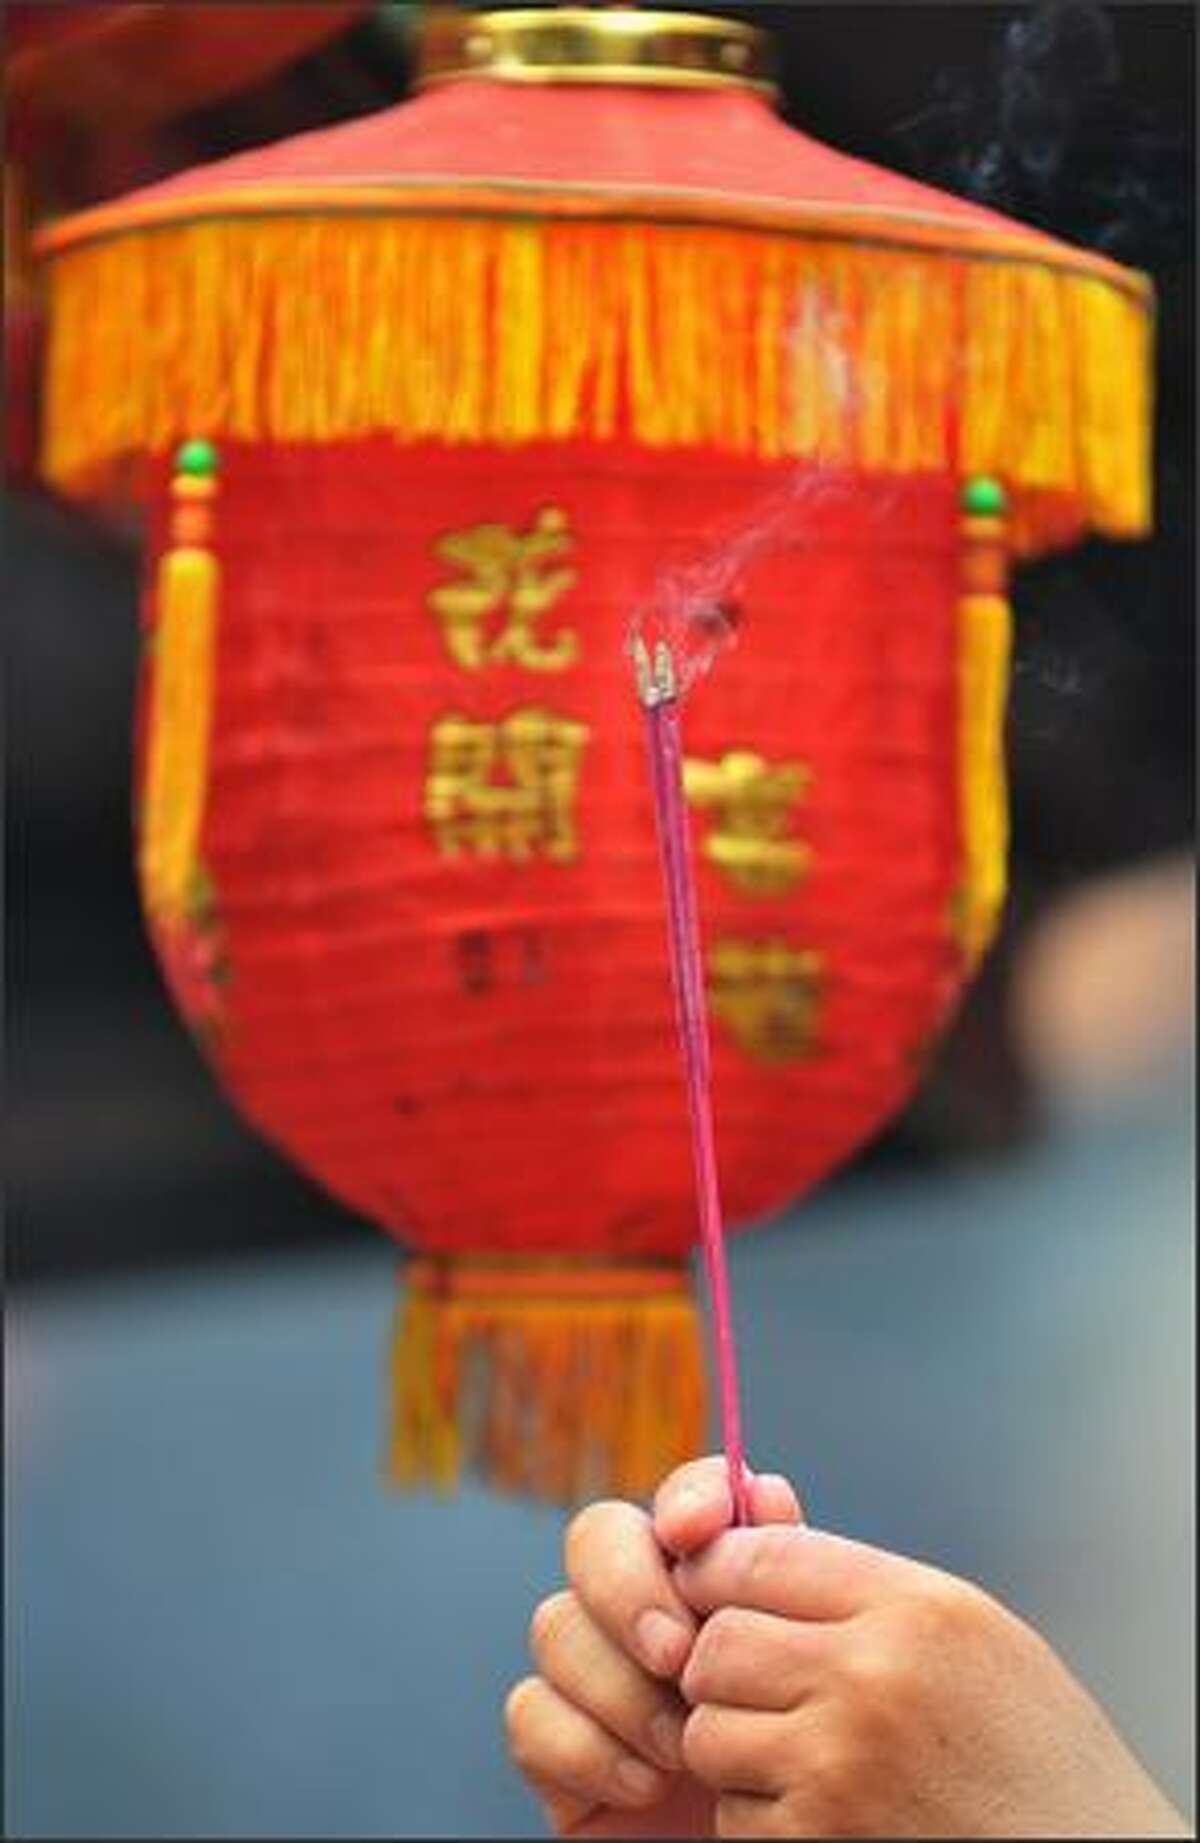 A worshipper holds incense sticks in front of a lantern during Chinese Lunar New Year prayers in Jakarta.